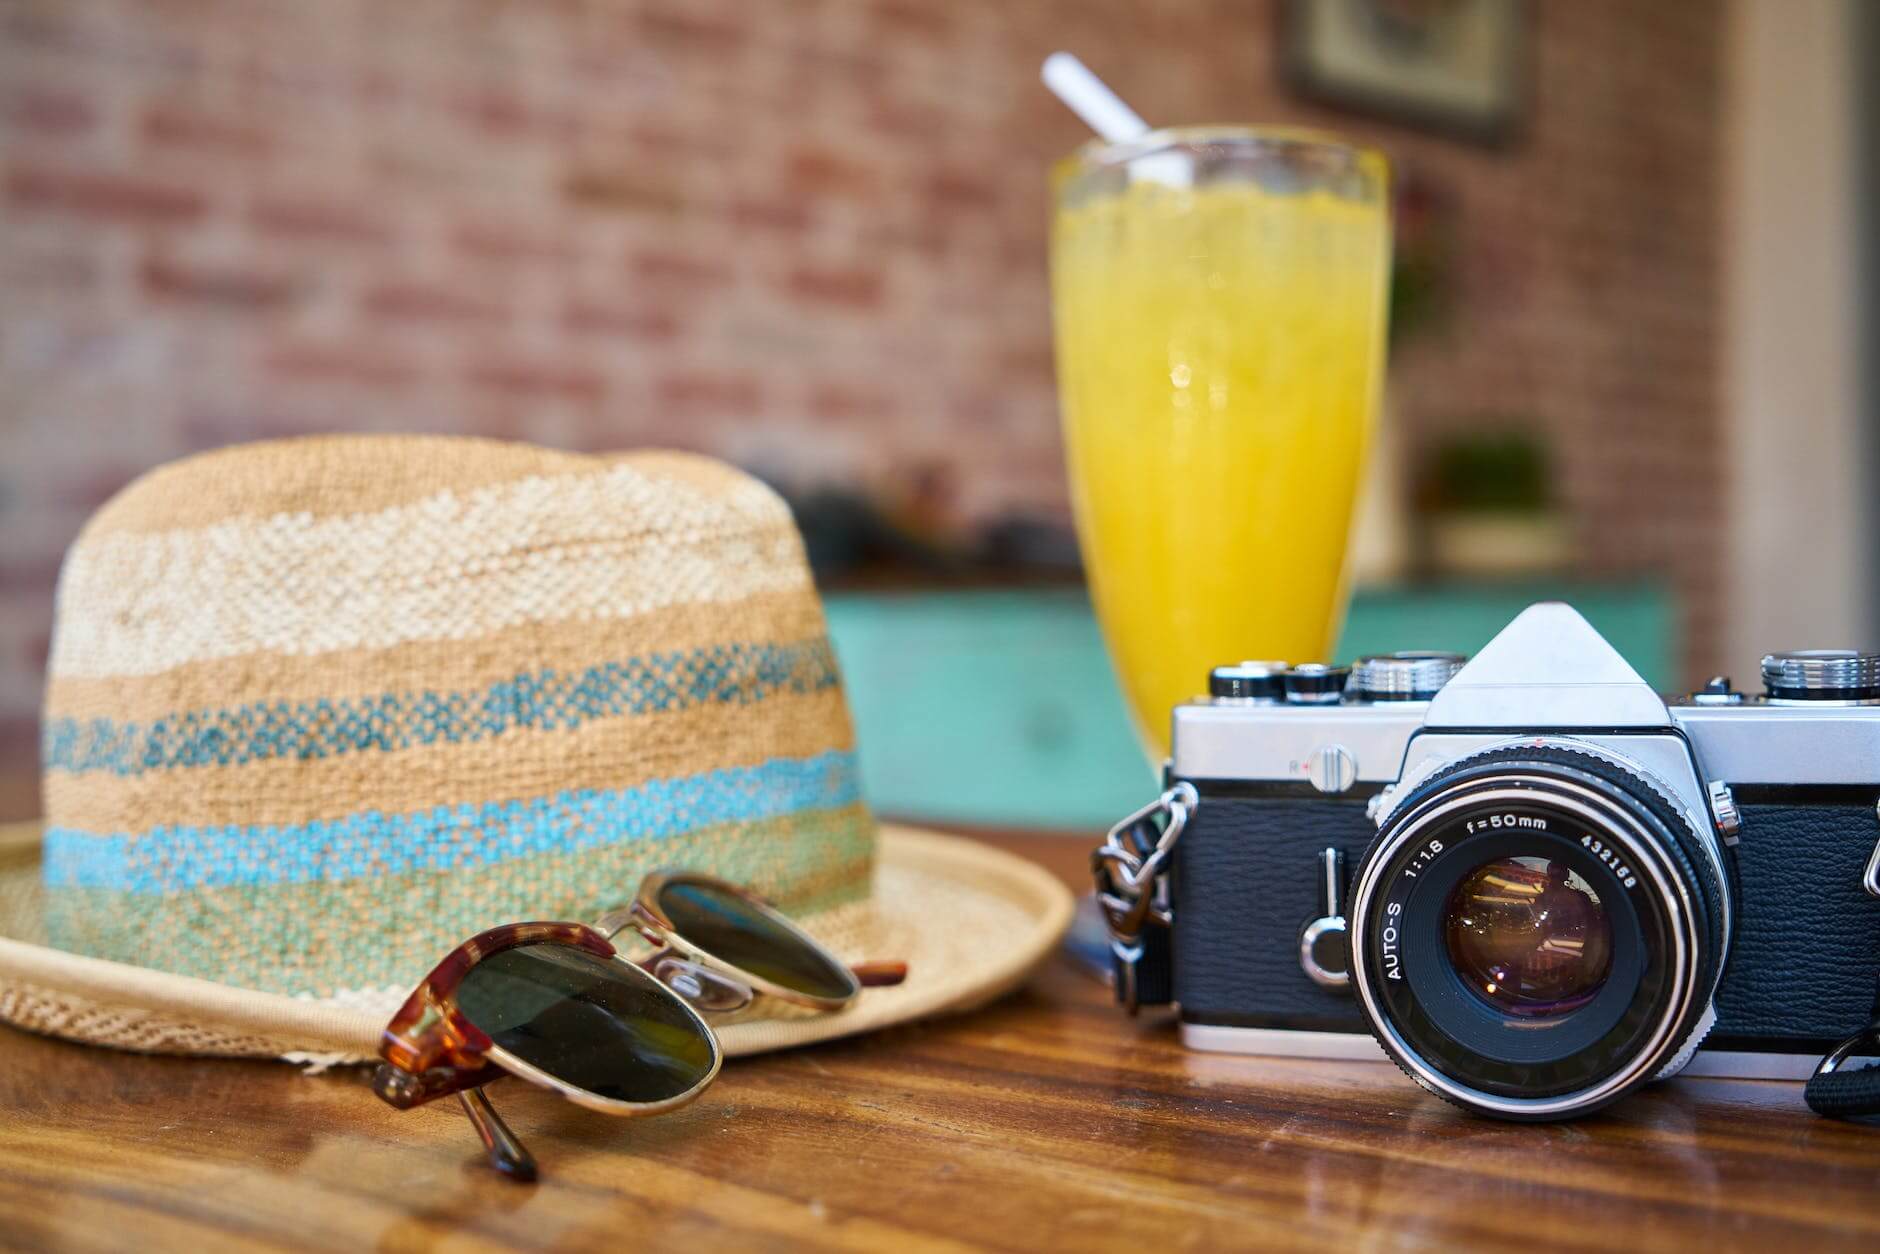 gray and black dslr camera beside sun hat and sunglasses